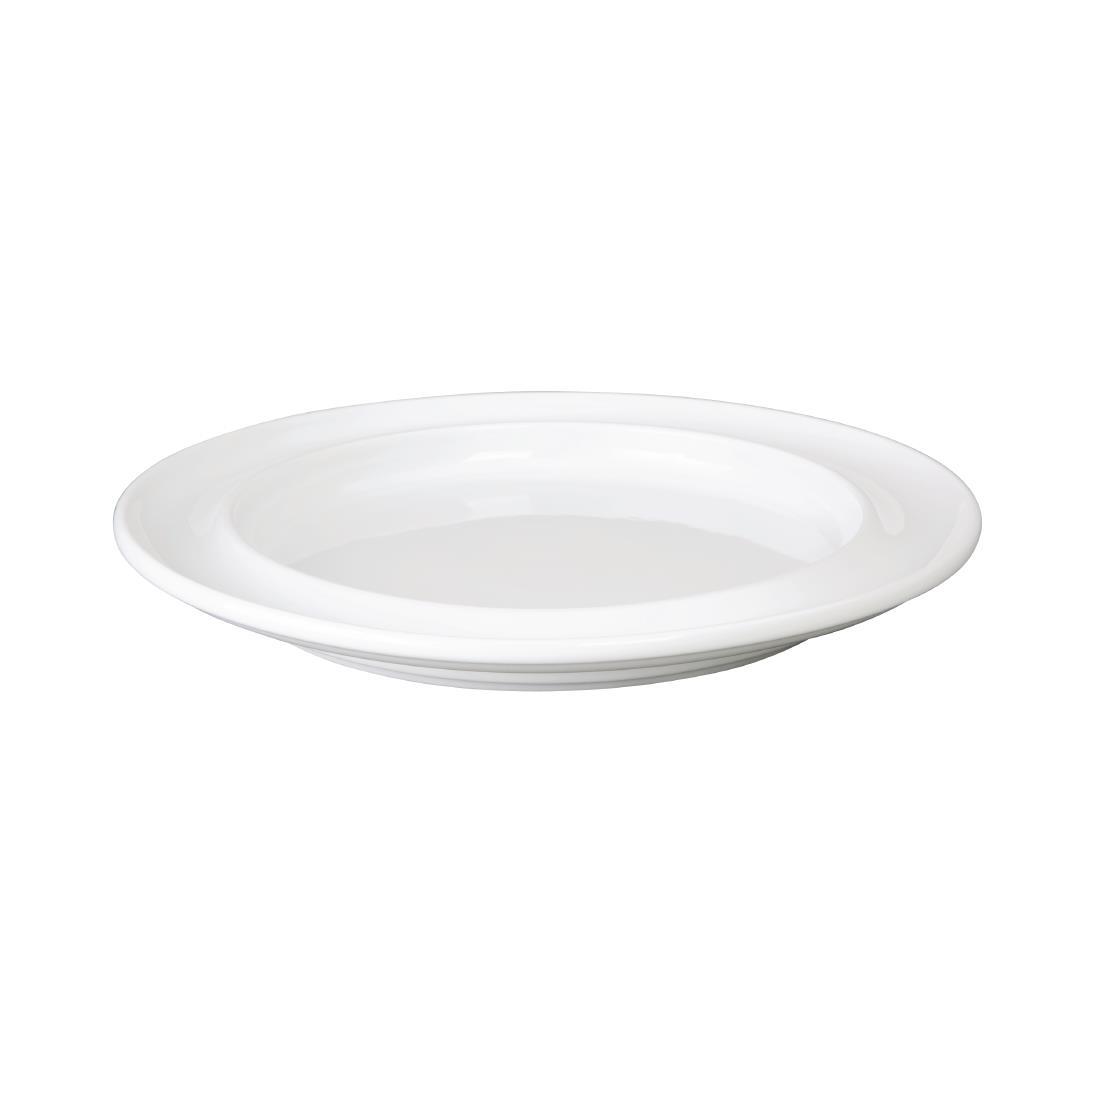 Olympia Heritage Raised Rim Plates White 253mm (Pack of 4) - DW153  - 2